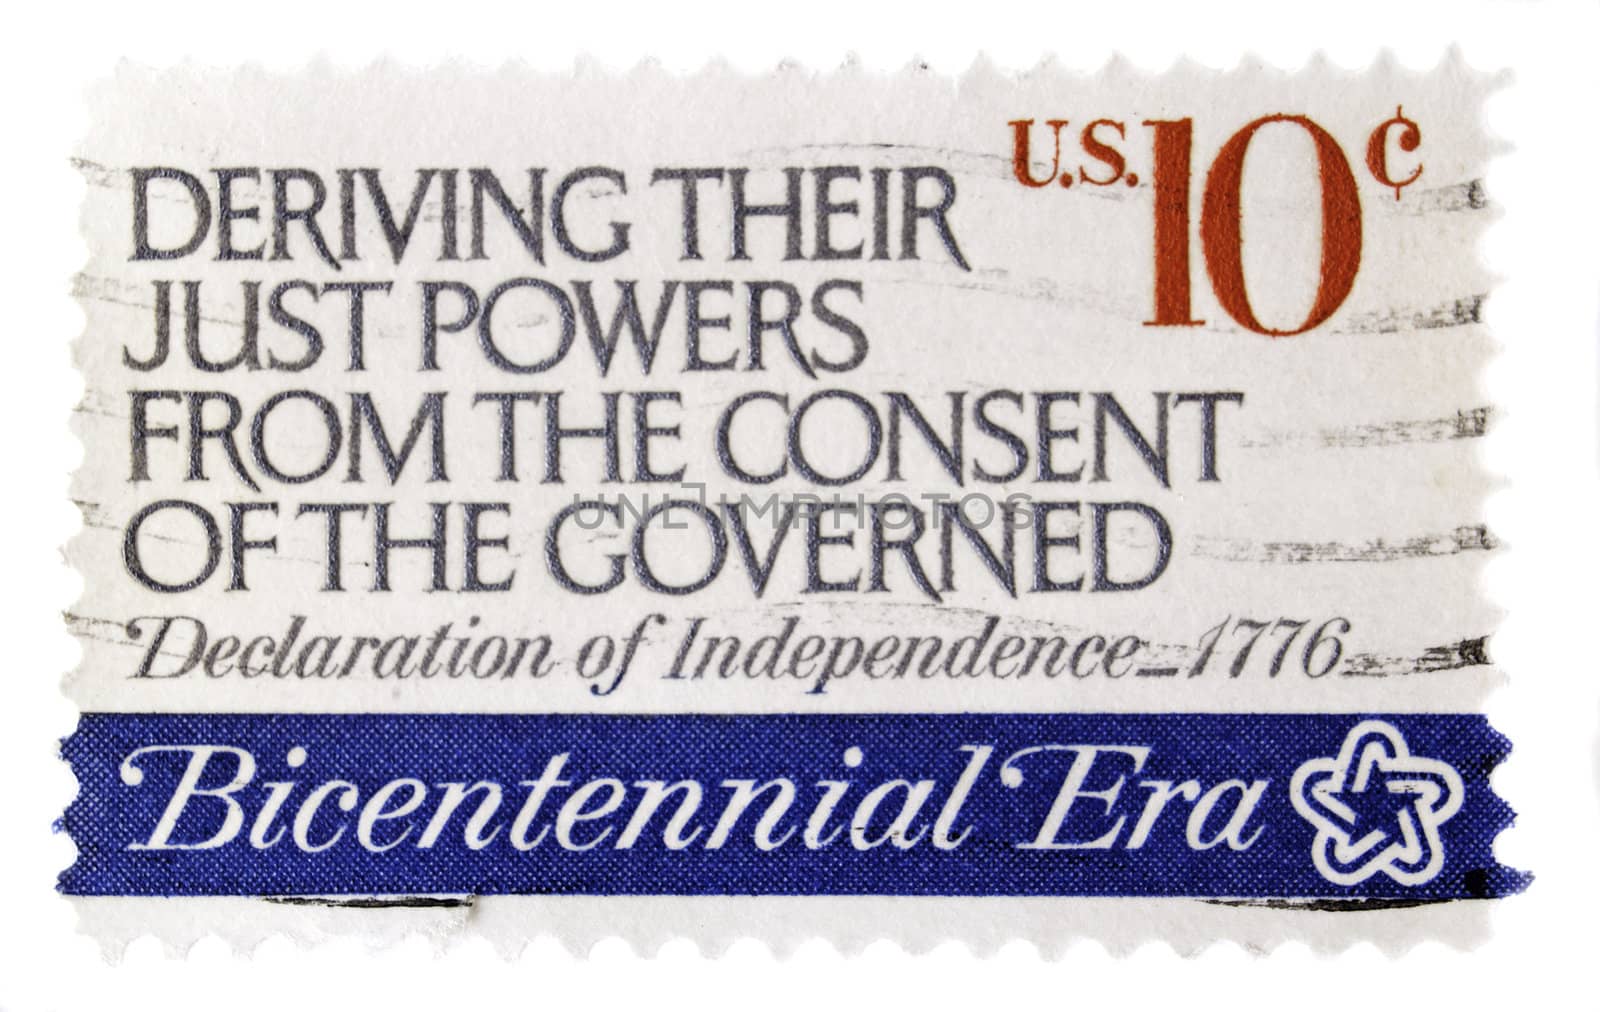 U.S. circa 1976: U.S. vintage postage stamp, commemorating the bicentennial witht he phrase :Deriving their just powers from the consent of the governed" and a face value of 10c